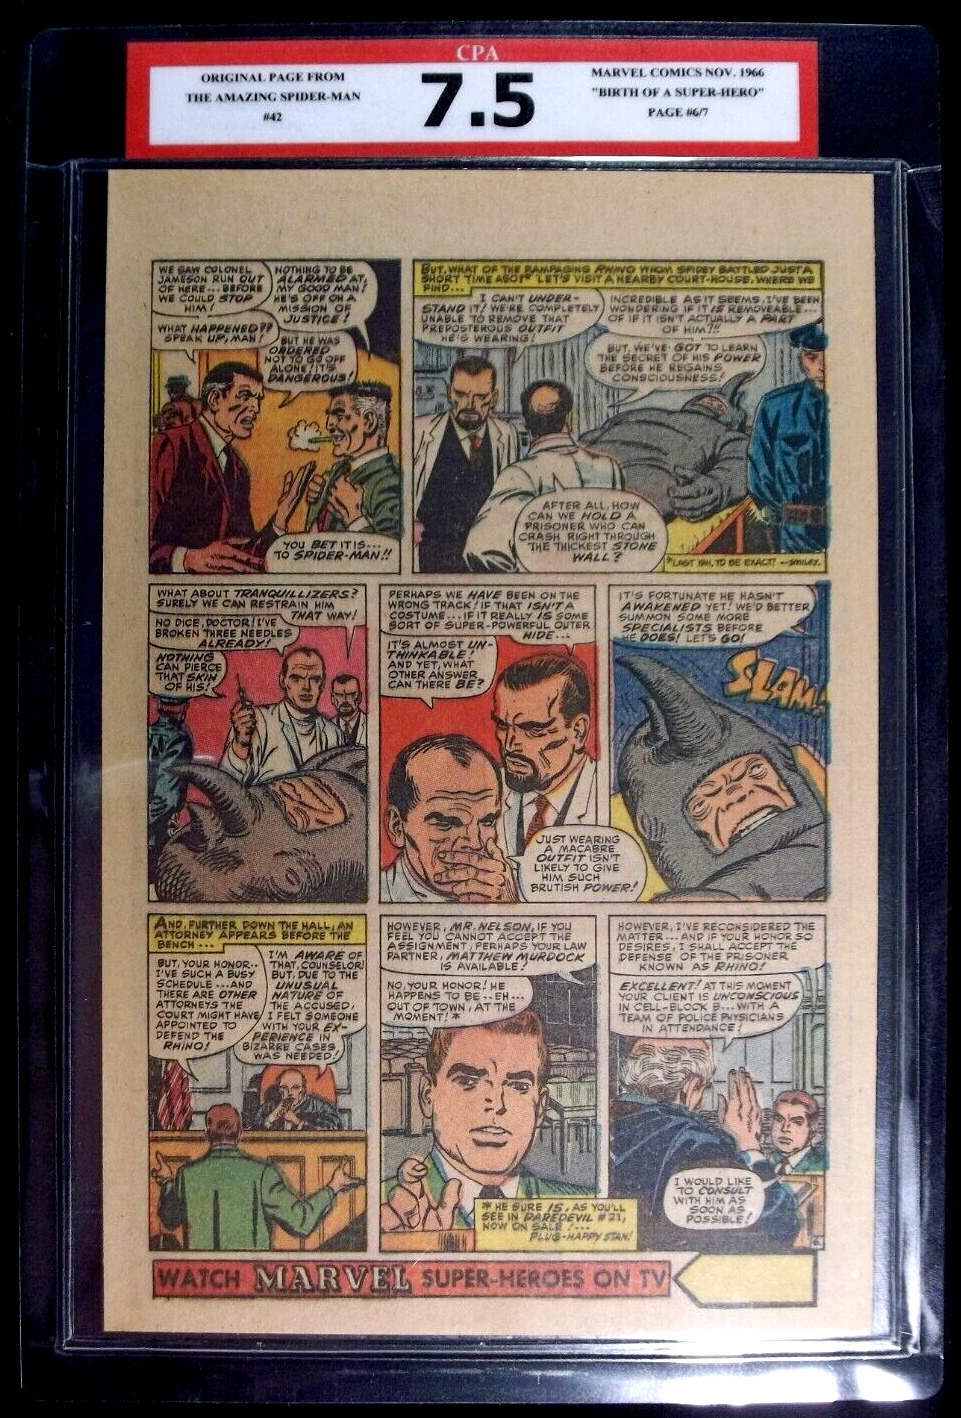 Amazing Spider-man #42 CPA 7.5 SINGLE PAGE #6/7 2nd app. The Rhino